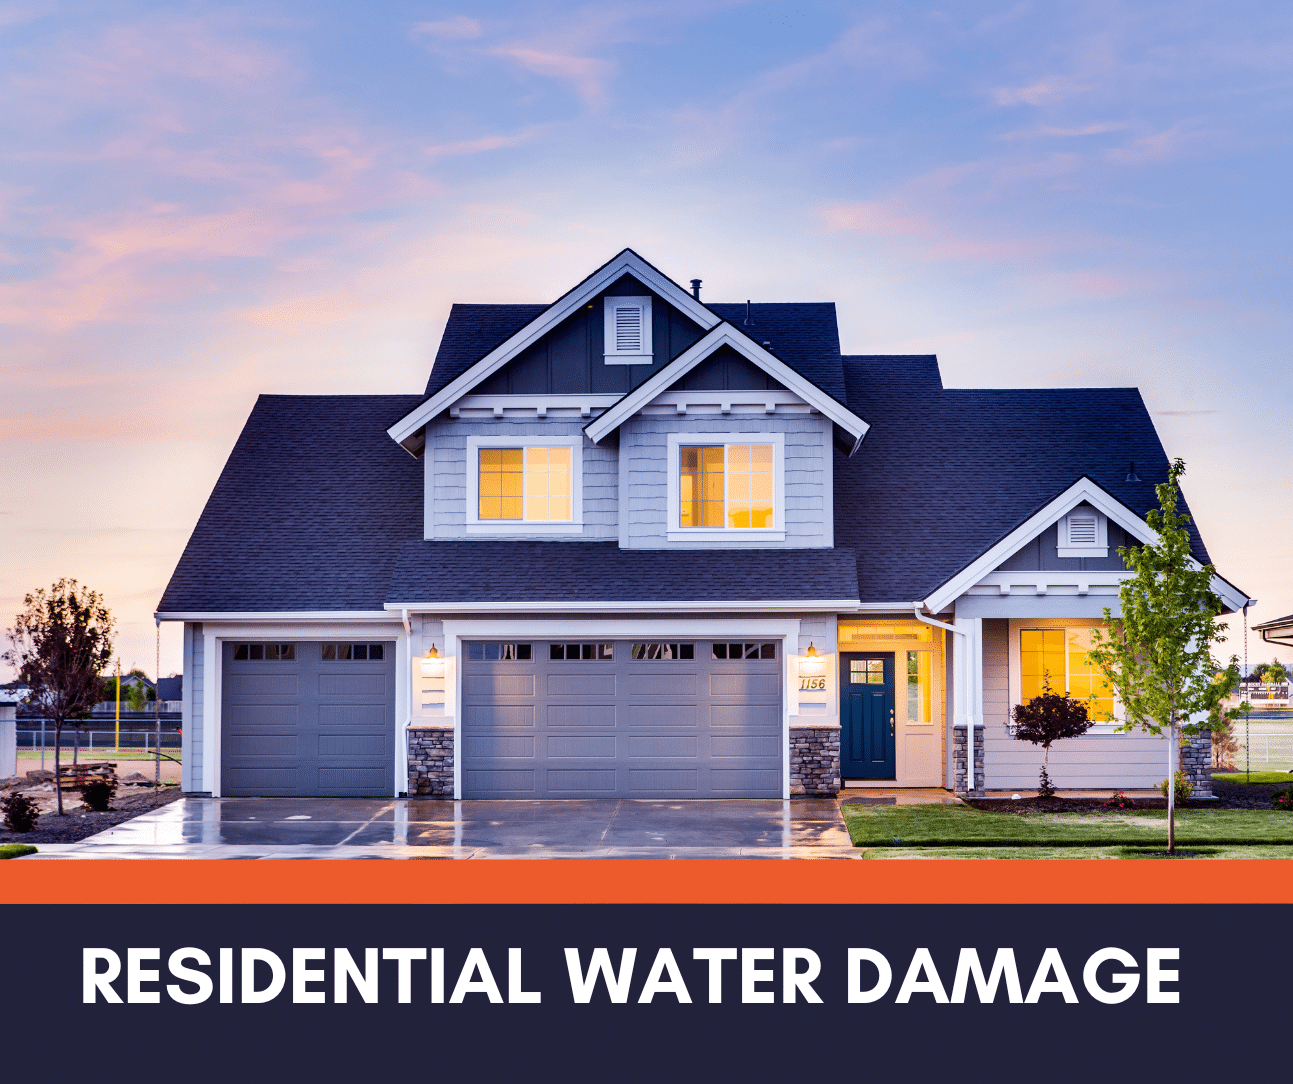 Call Dry Fast for water mitigation services